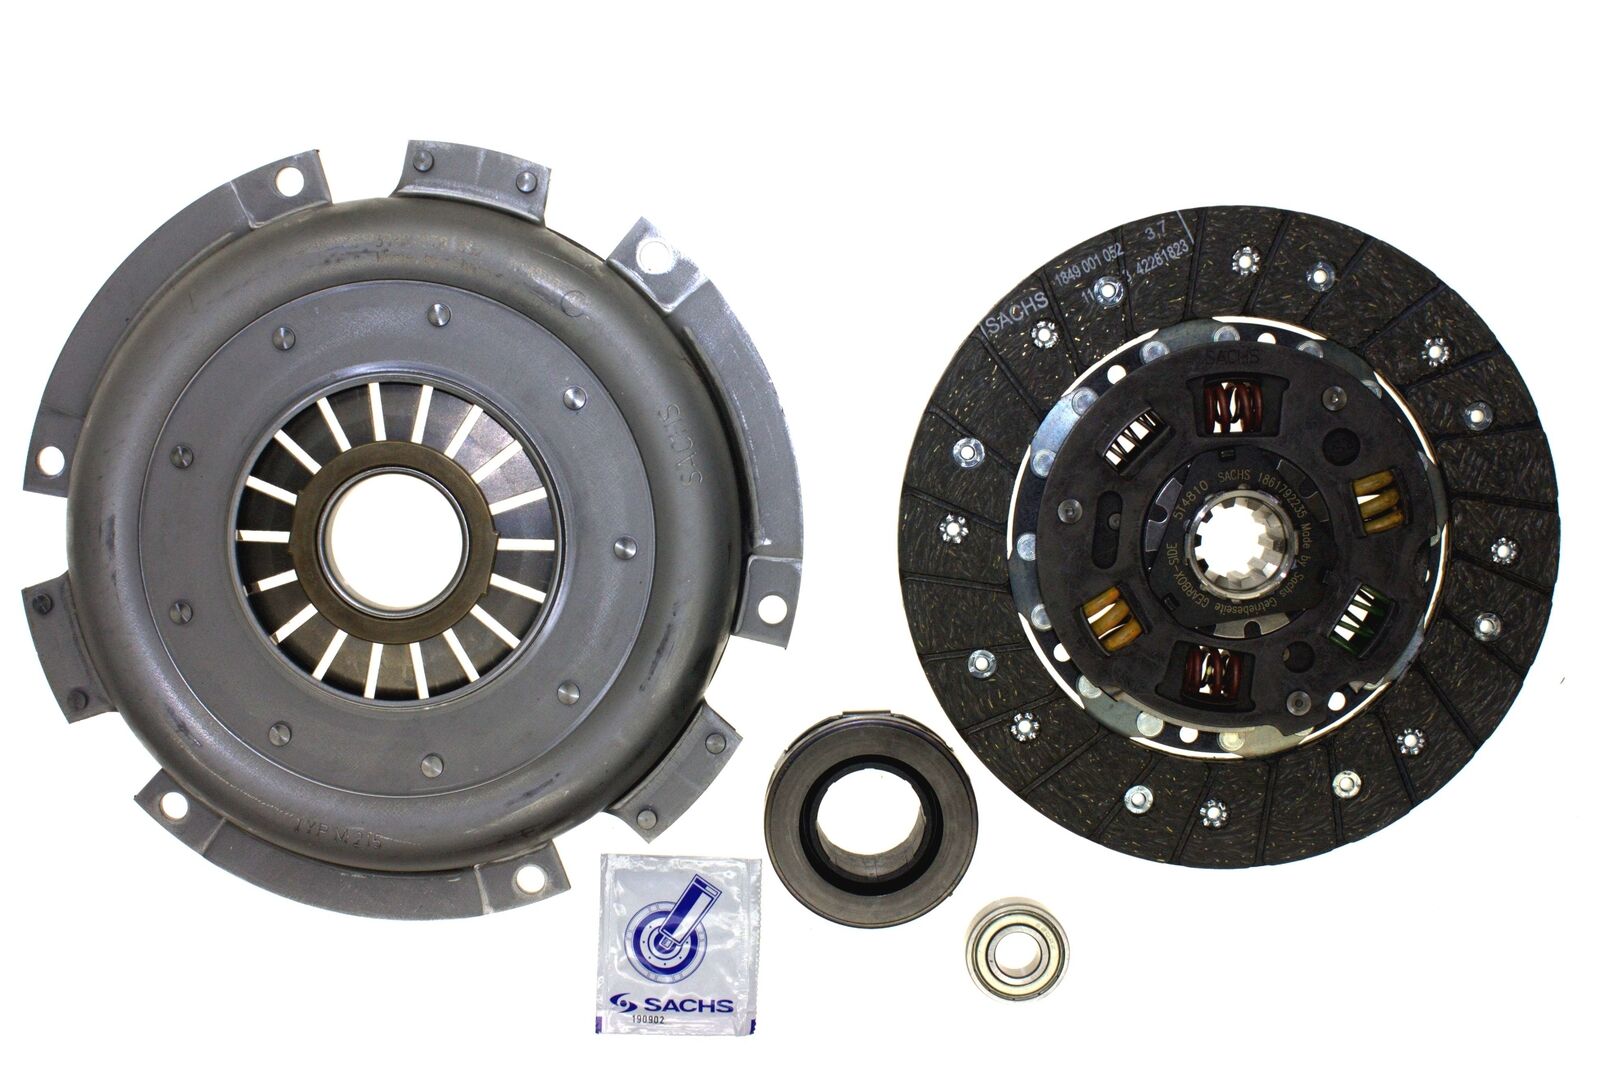  Clutch Kit for Mercedes-Benz 240D 1975 - 1983 & Others SACHSKF152-02